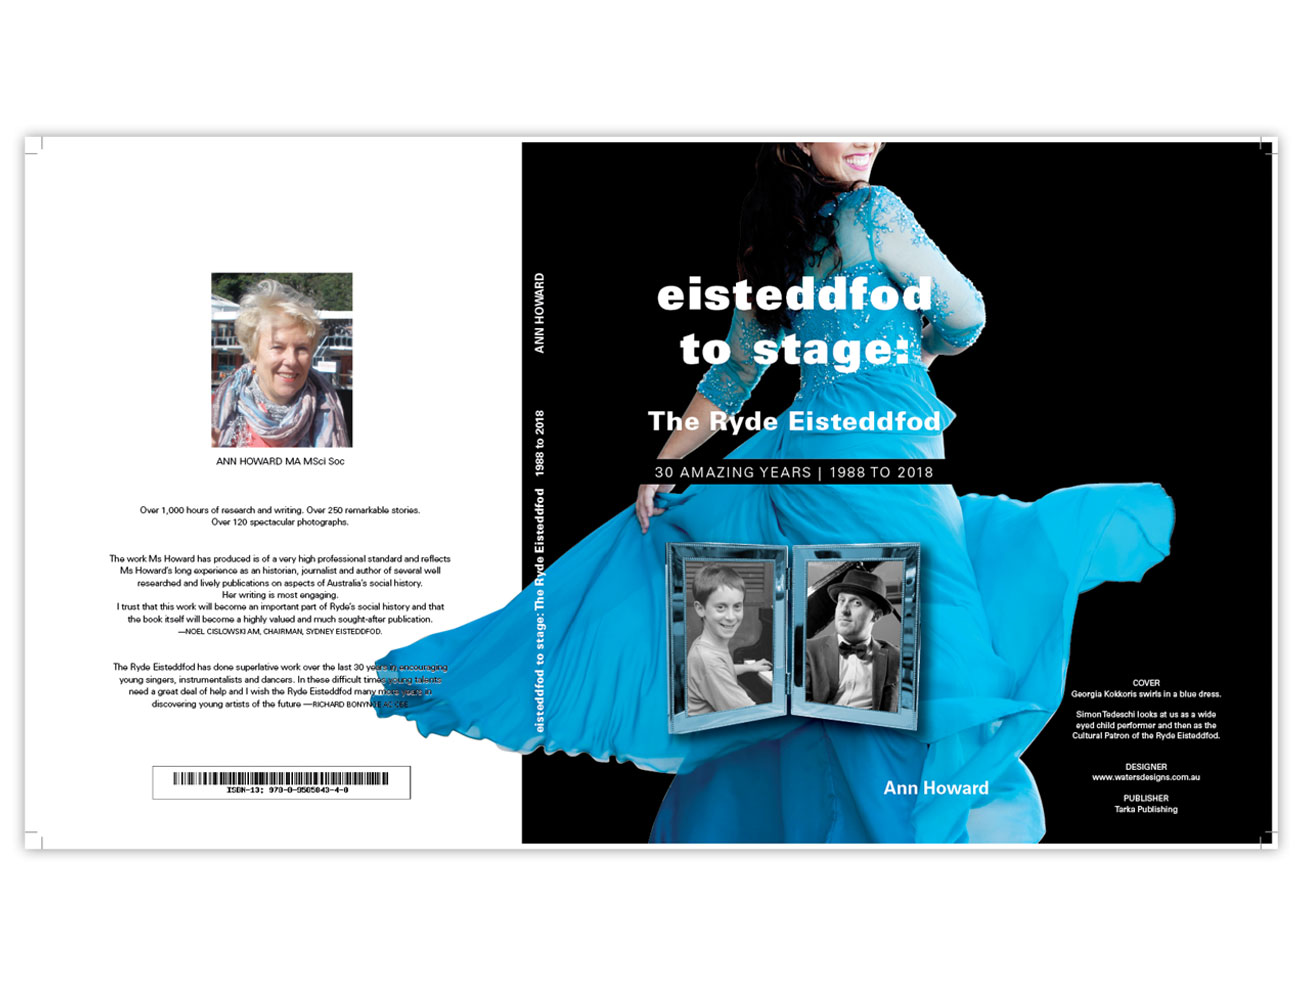 Book design, non-fiction books. Eisteddfod to stage: The Ryde Eisteddfod